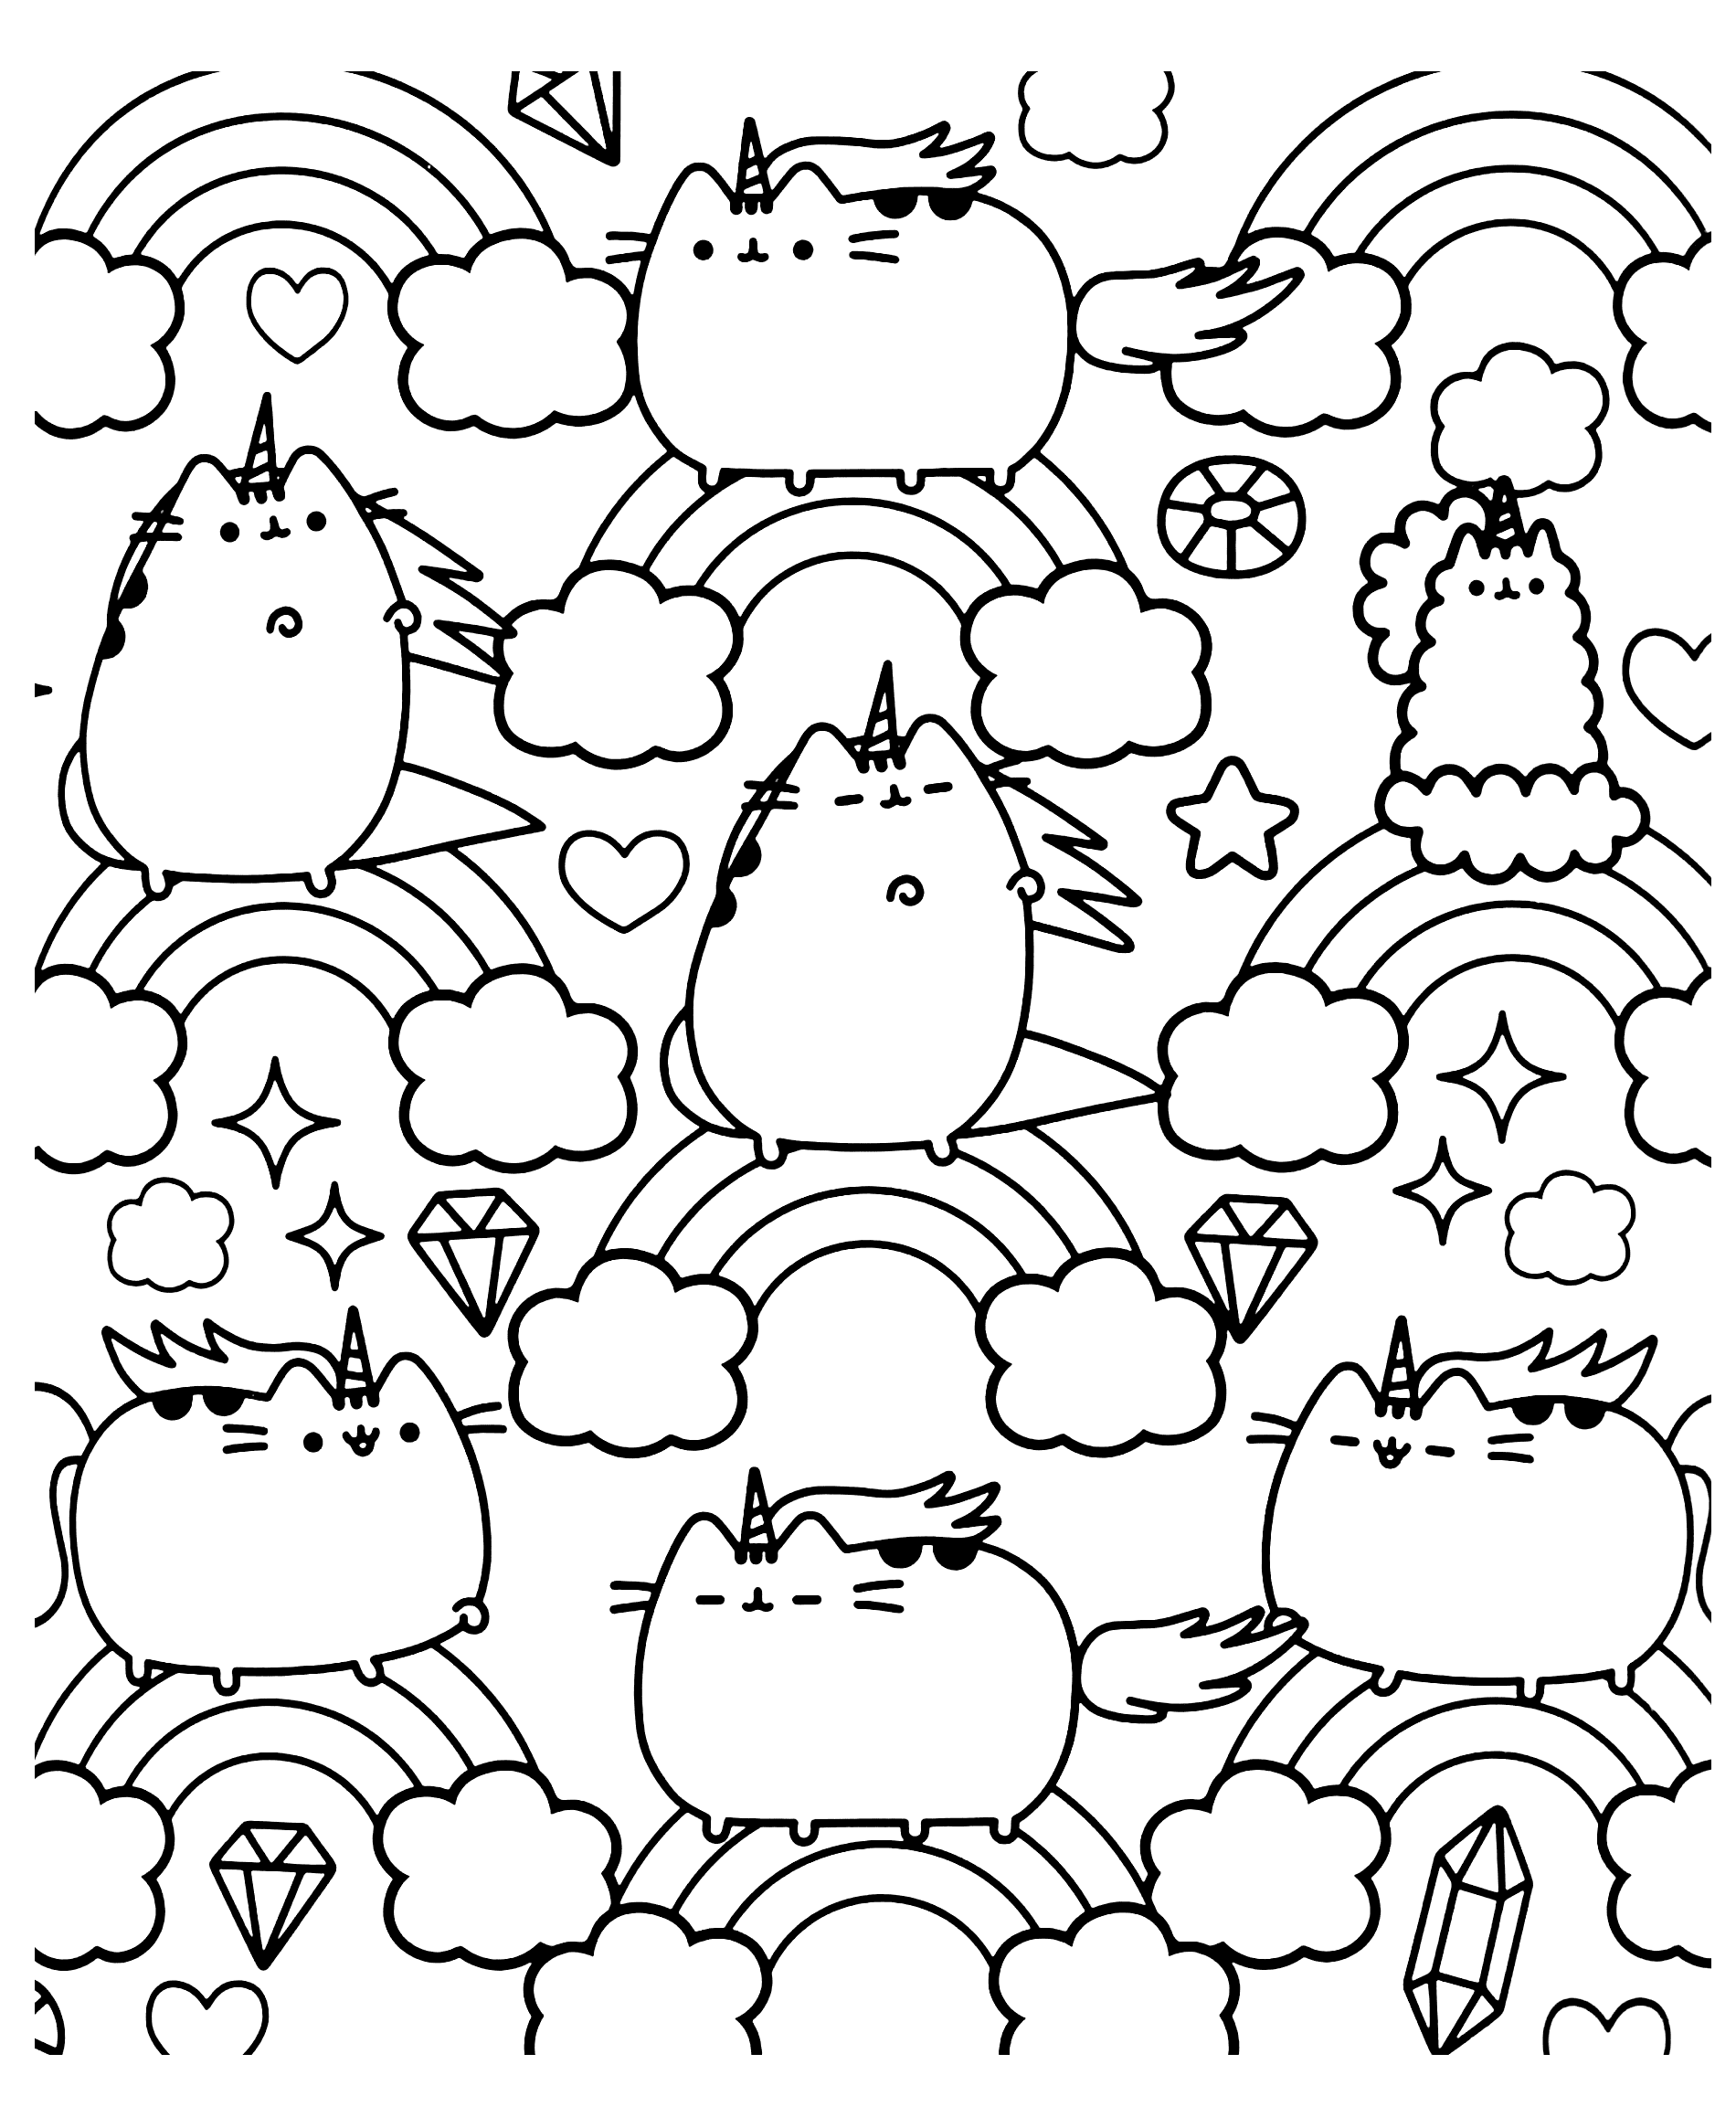 Pusheen to color for kids – Pusheen Kids Coloring Page